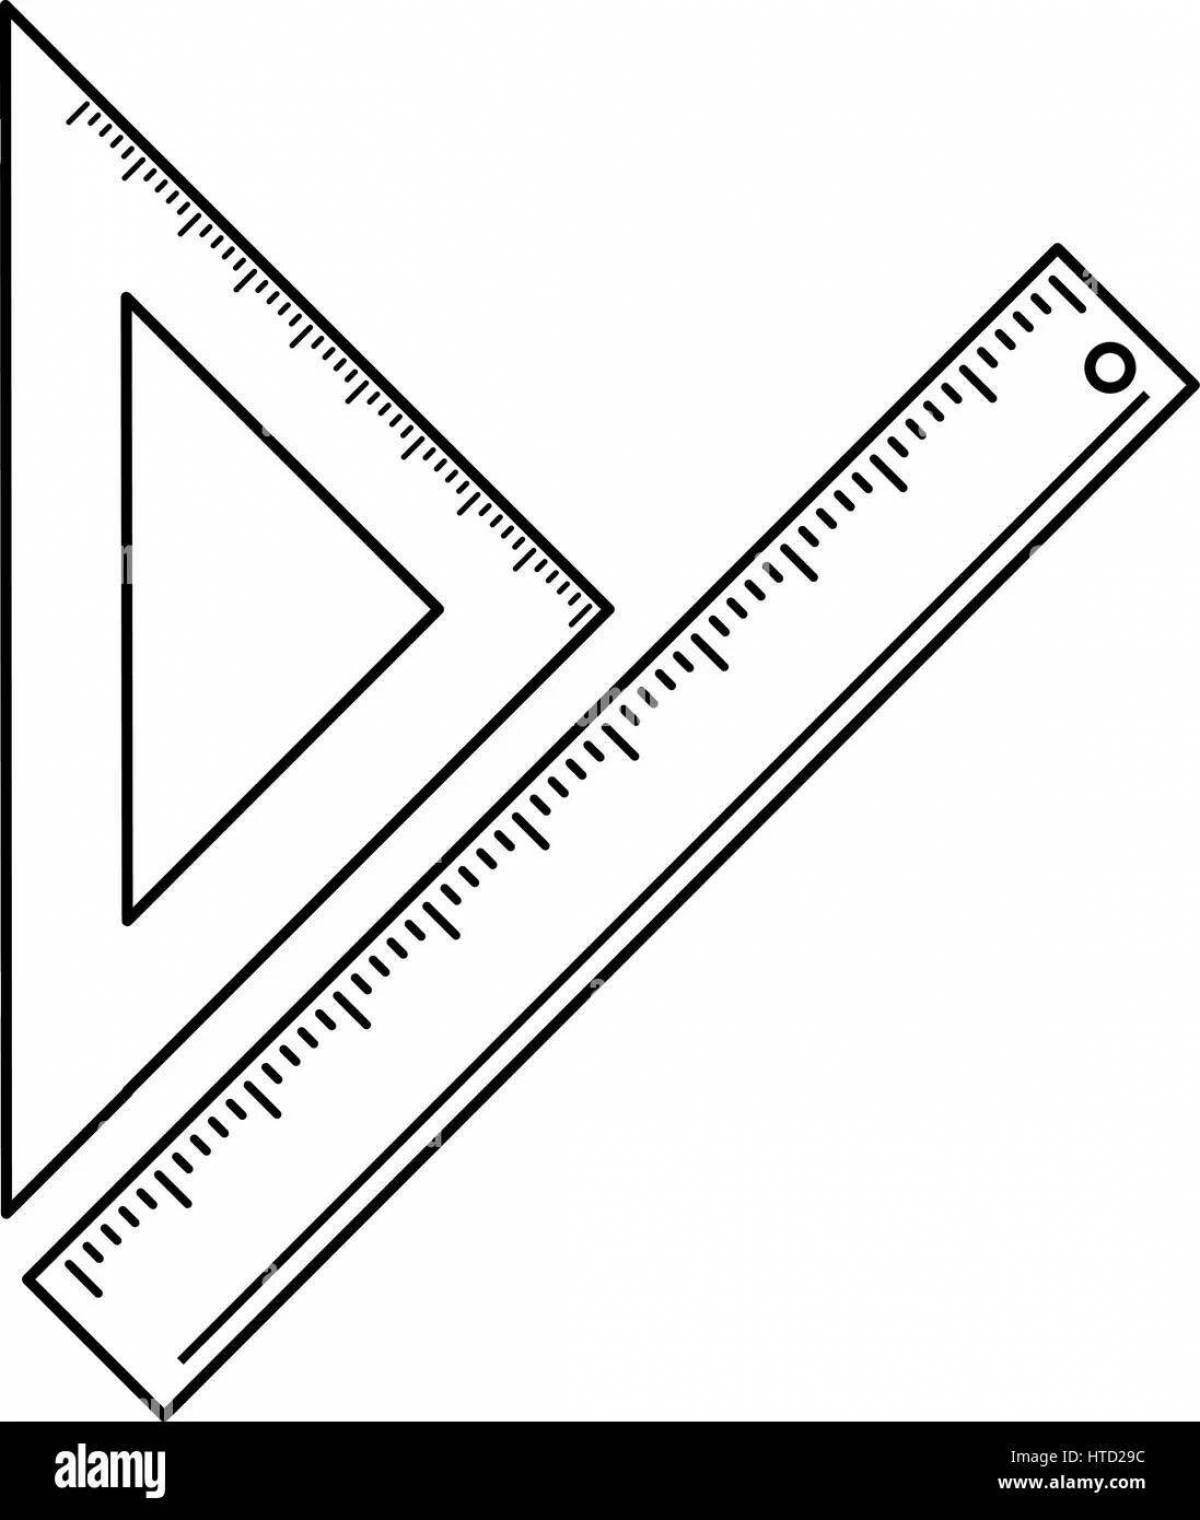 Gorgeous Ruler Coloring Page for Toddlers